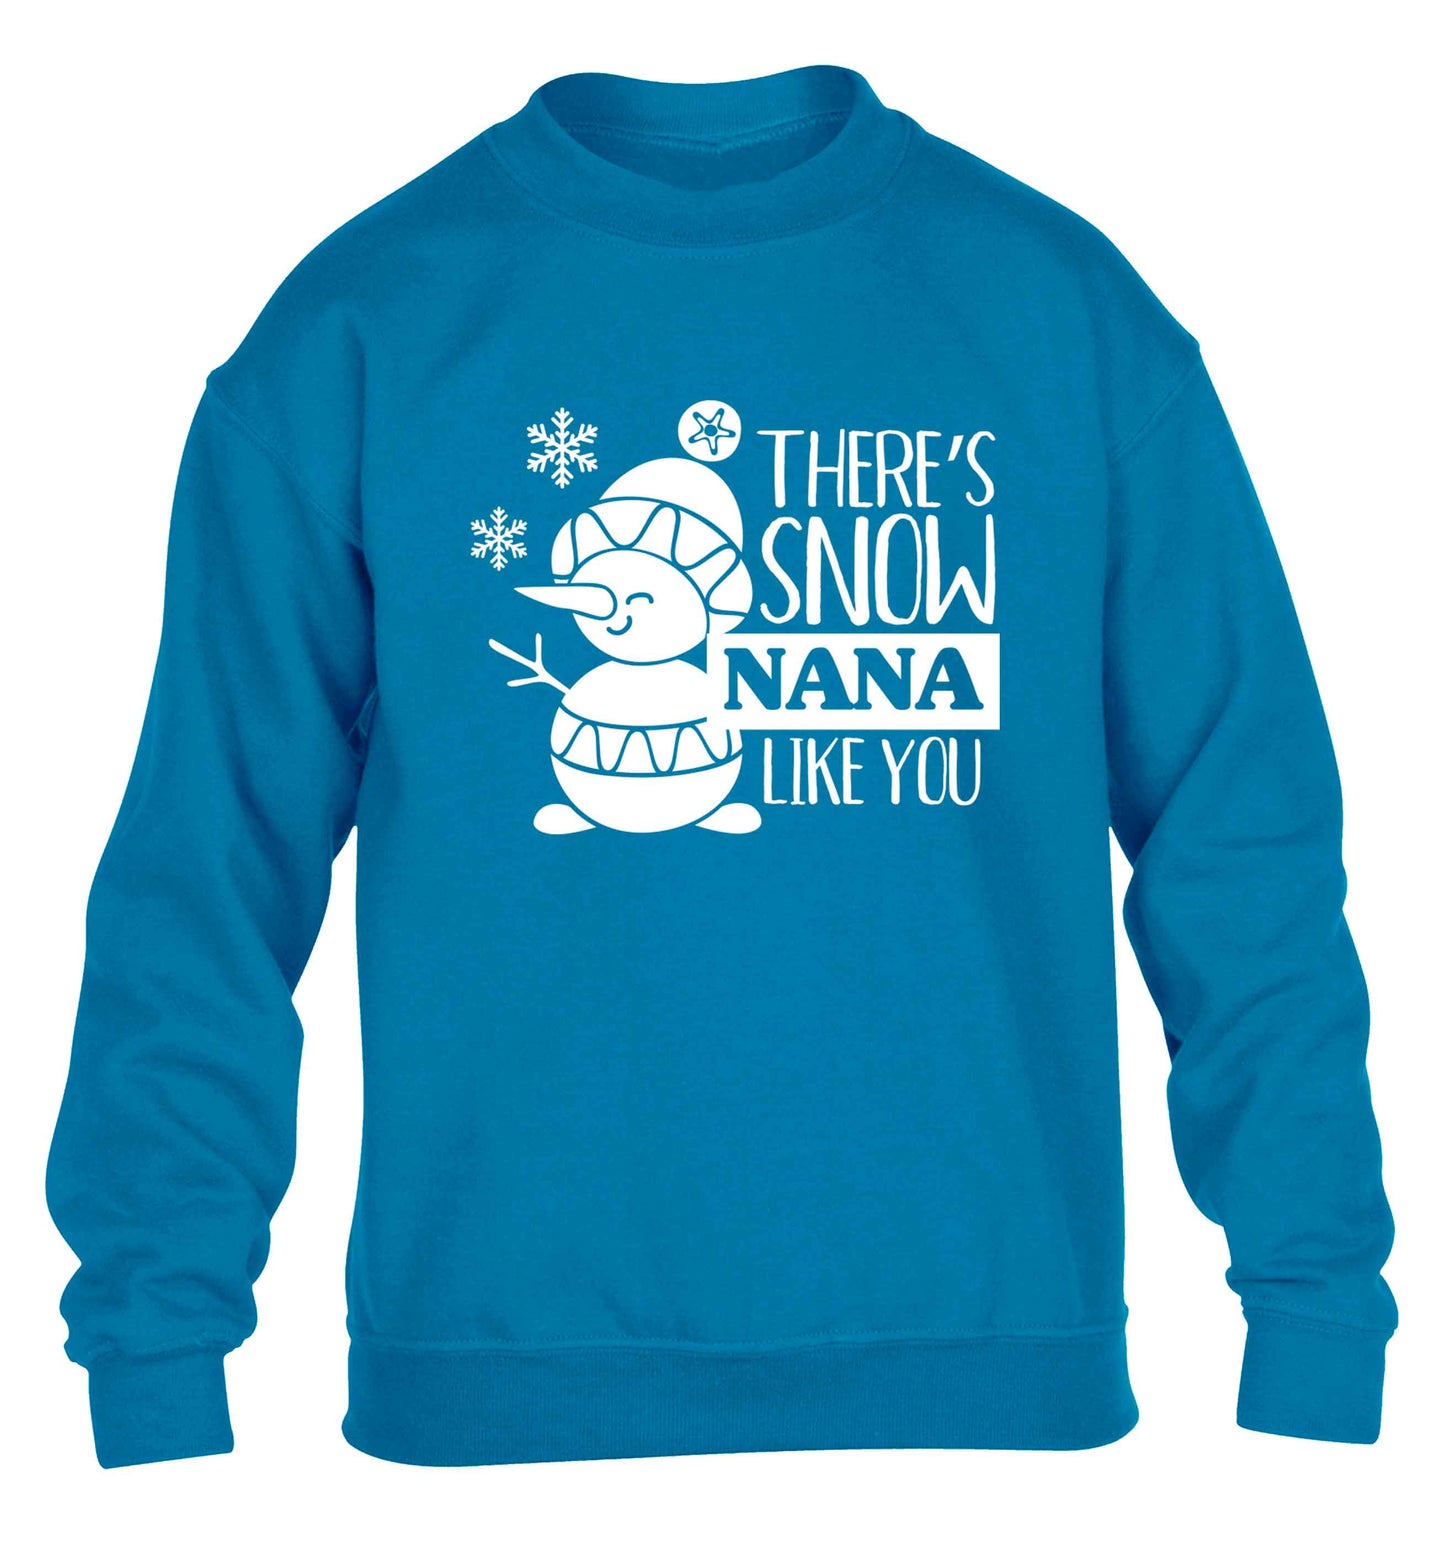 There's snow nana like you children's blue sweater 12-13 Years